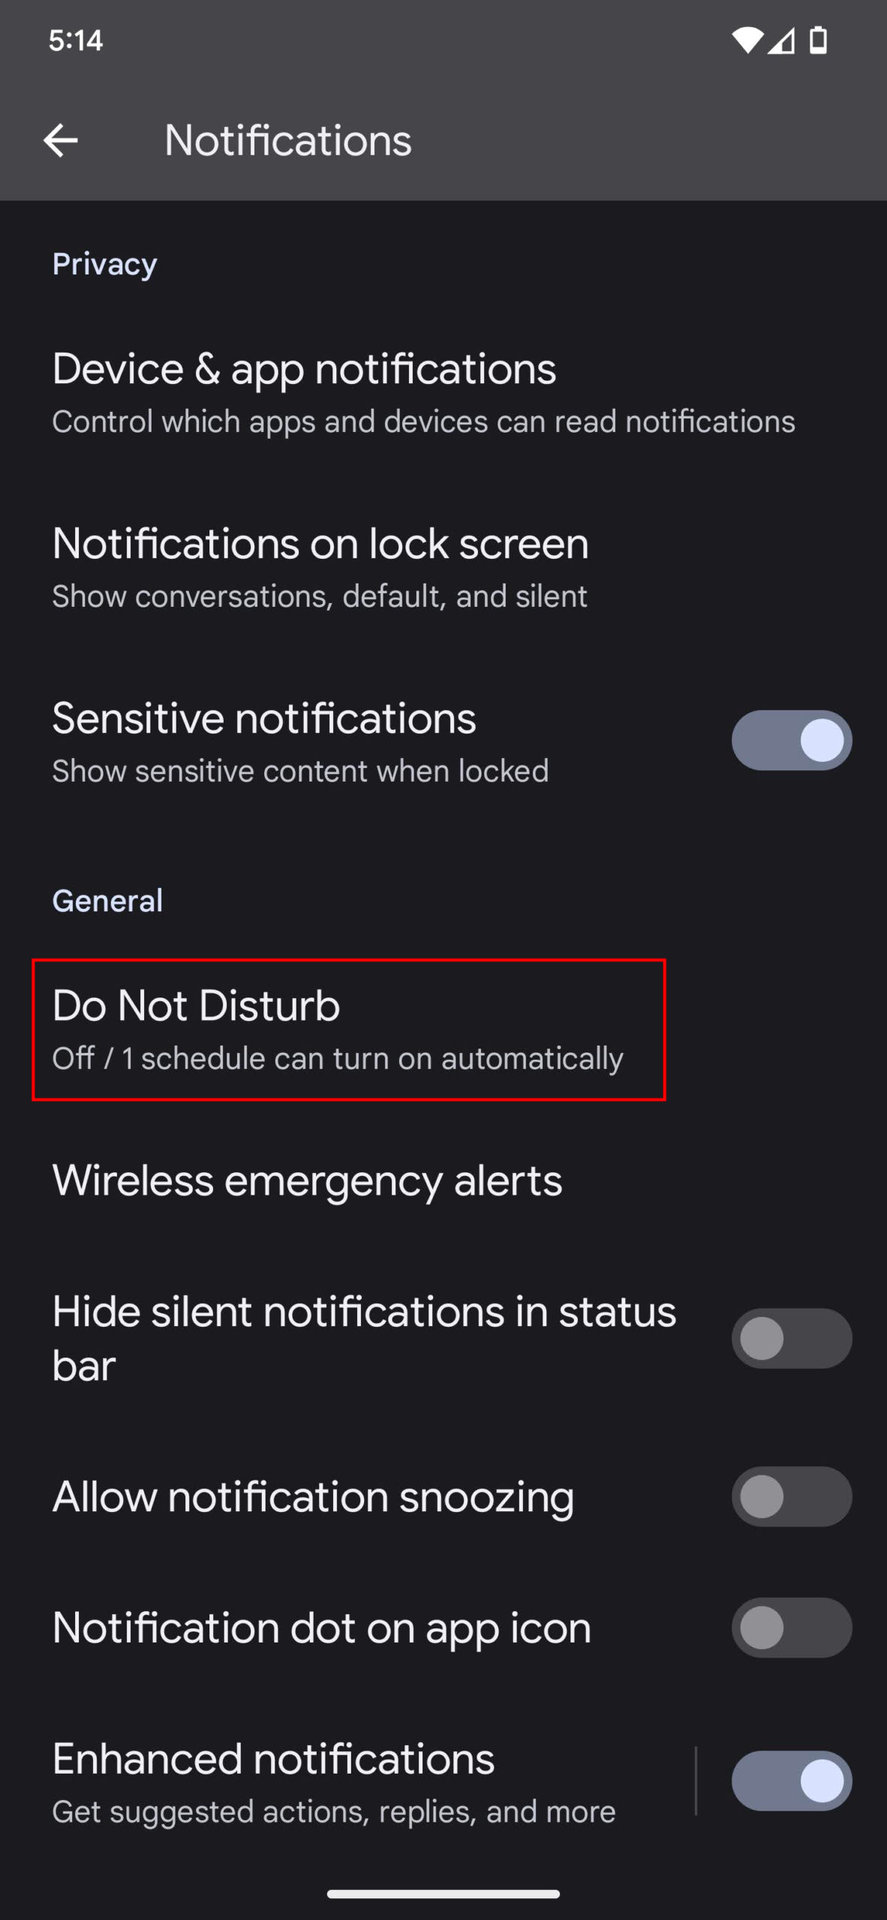 How to choose which notifications you want to hide or show 2